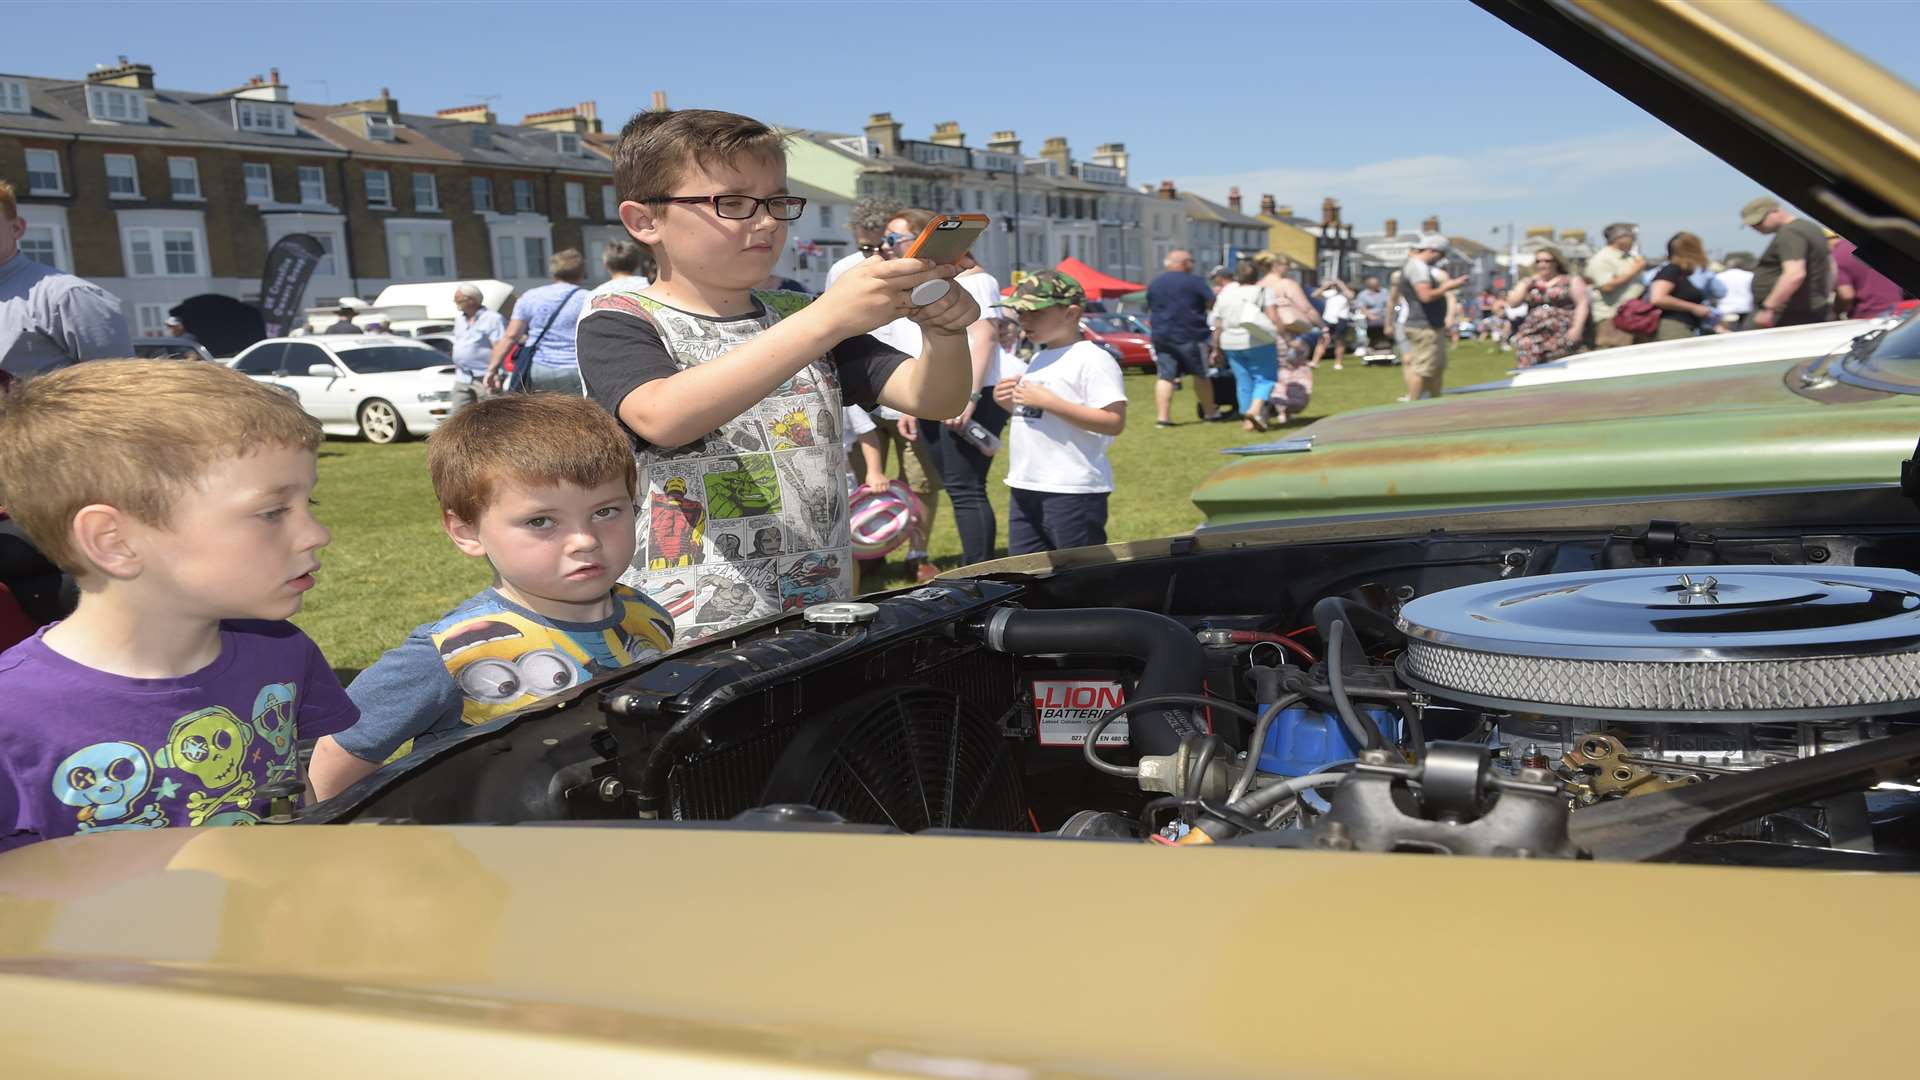 The event also attracted young car fanatics